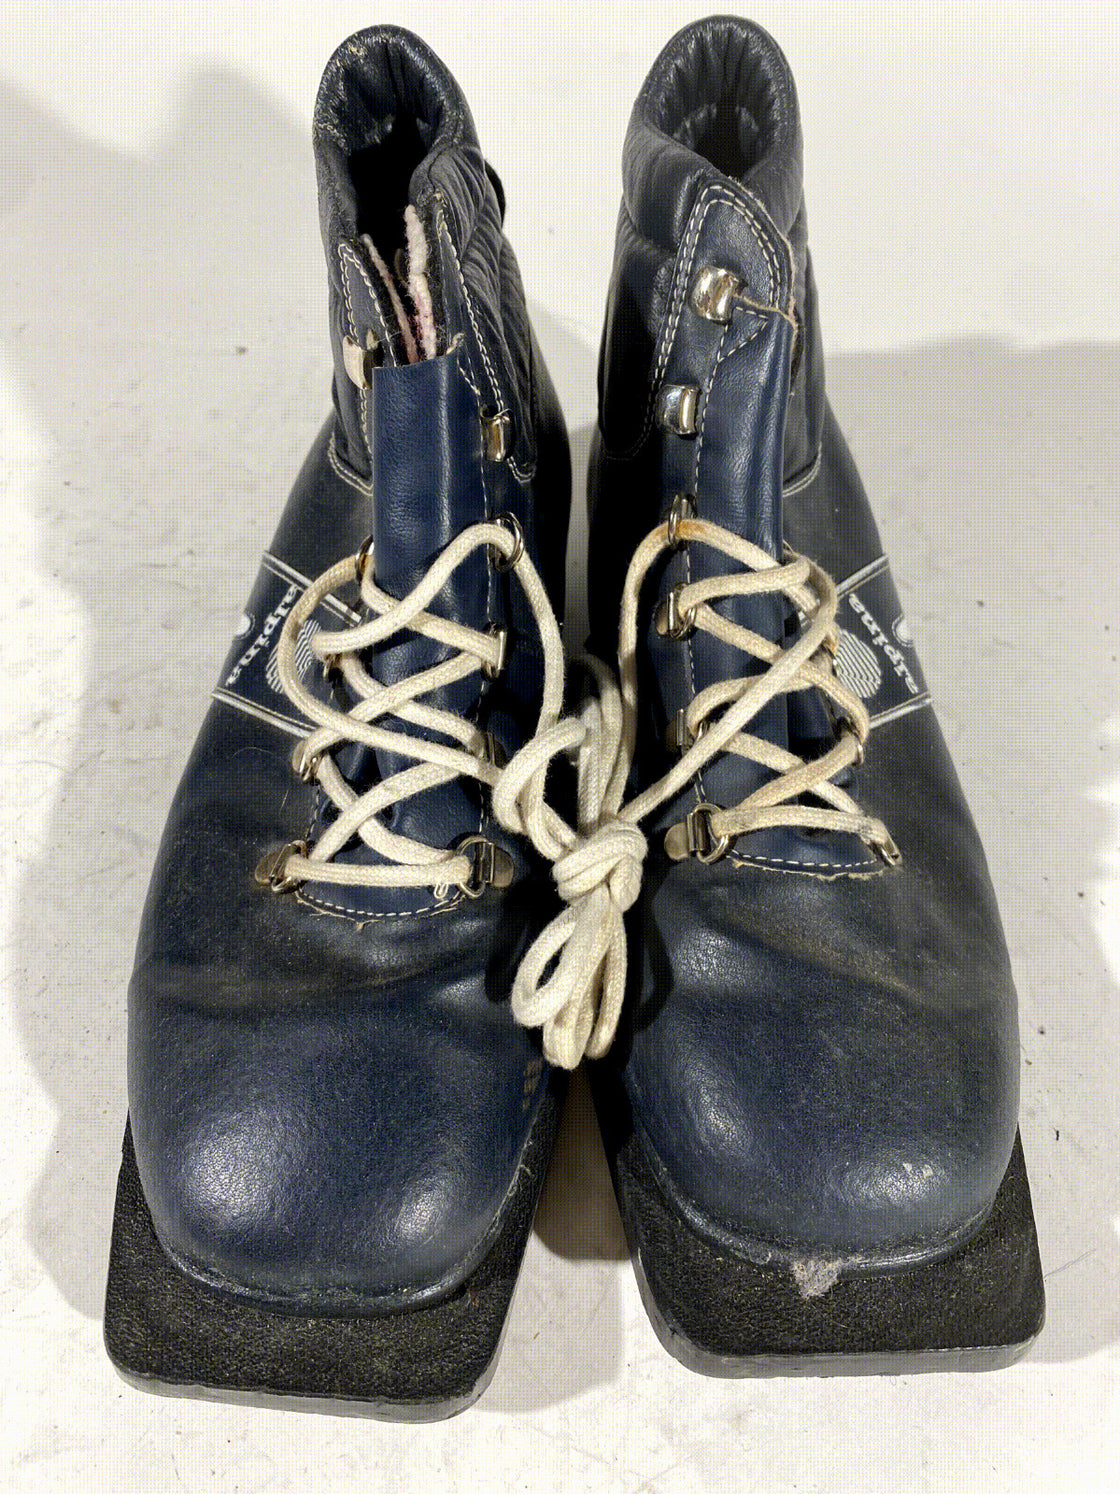 Alpina Vintage Nordic Norm Cross Country Ski Boots Size EU41 US8 NN 75mm